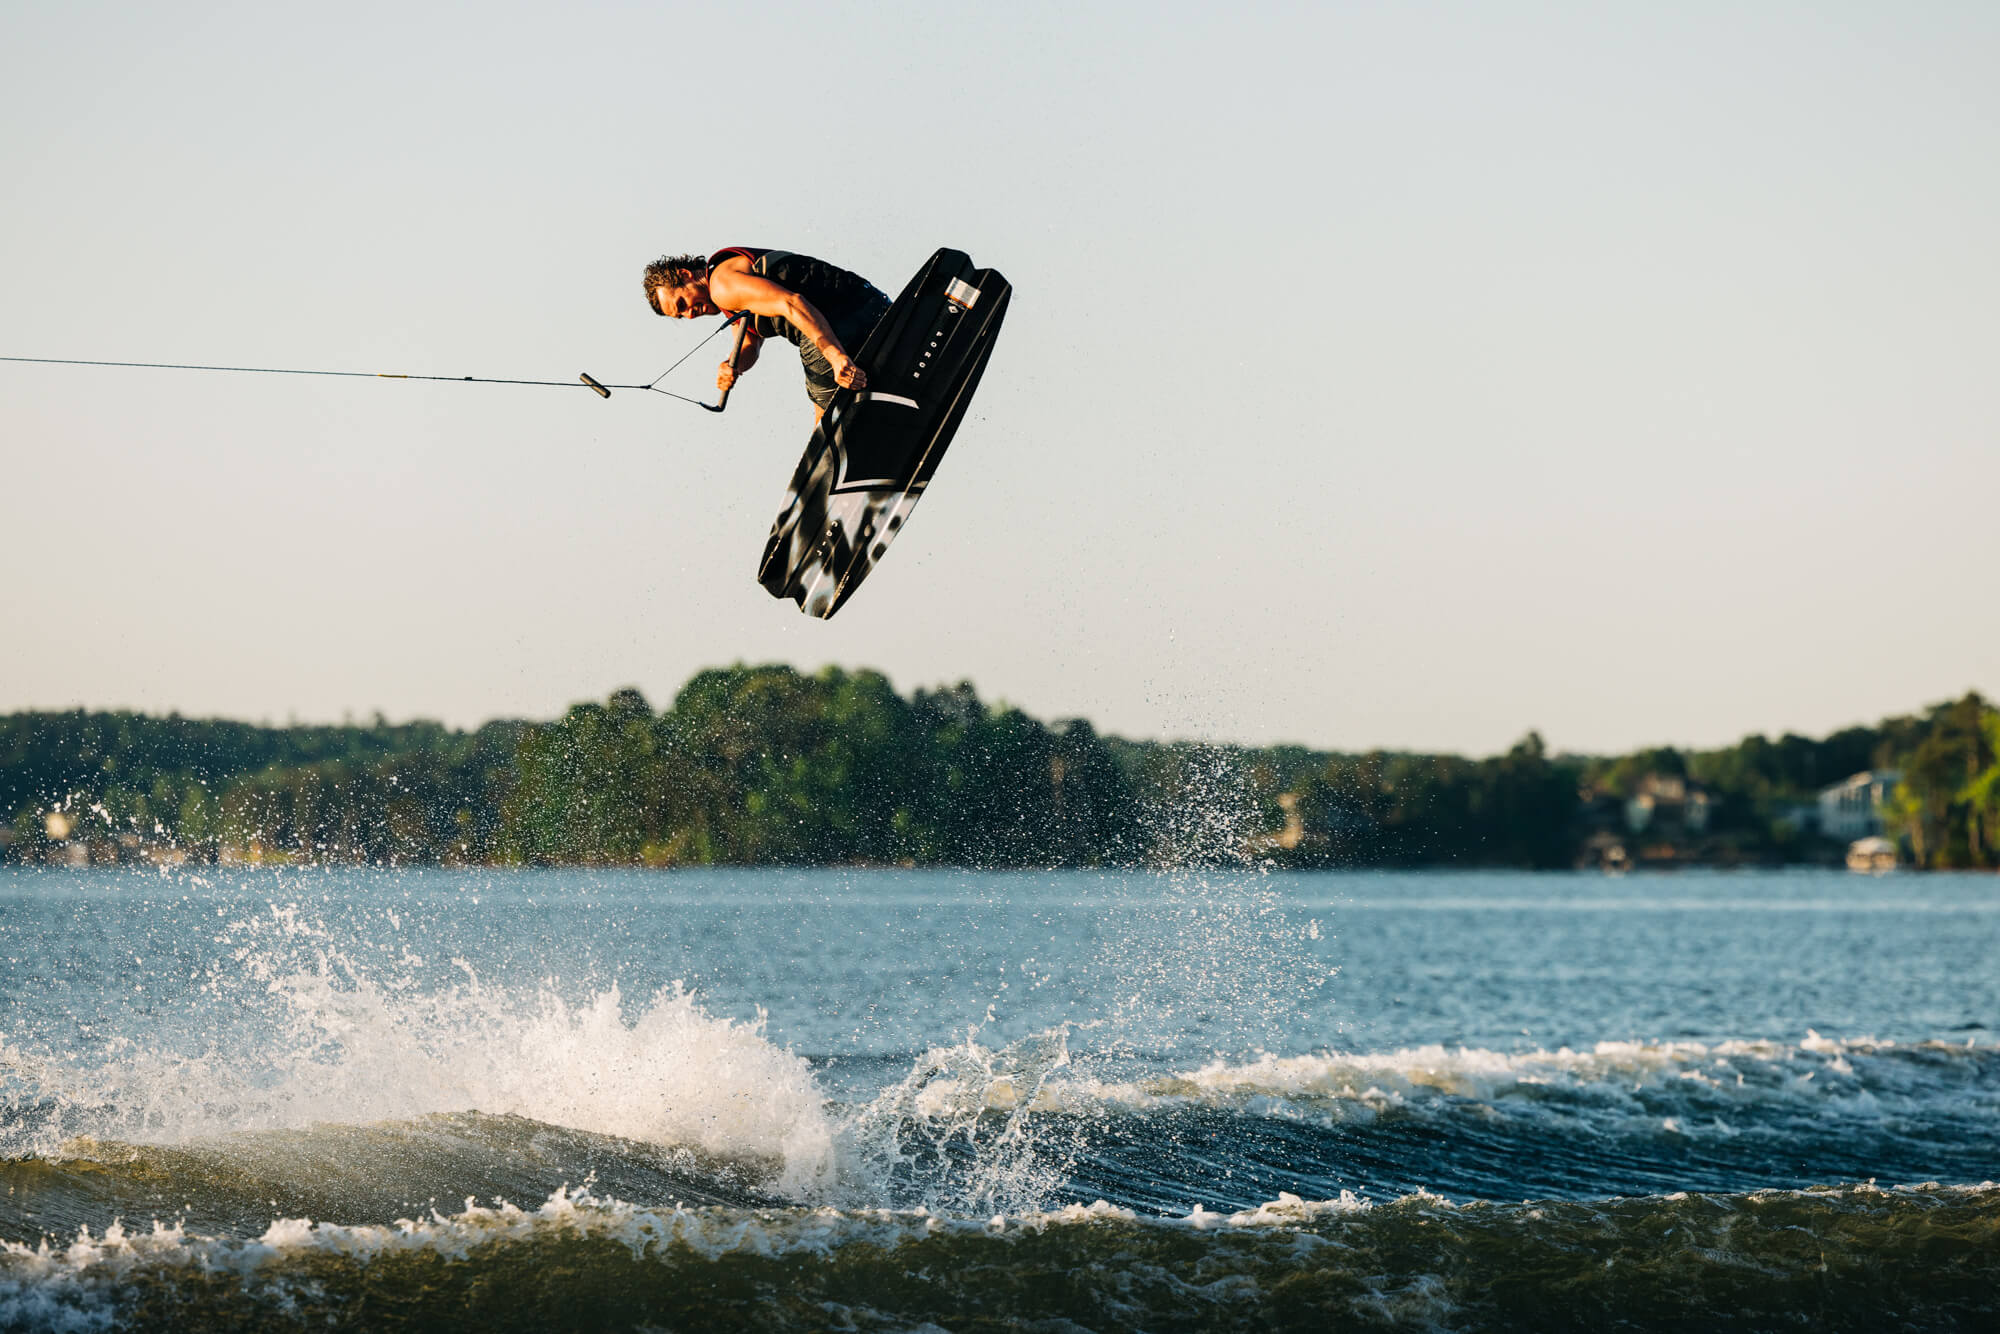 Harley Clifford, a lightweight wakeboarding pro, defies gravity as he effortlessly glides through the air over a serene body of water on the Liquid Force 2024 Remedy Aero Wakeboard (Pre-Order).